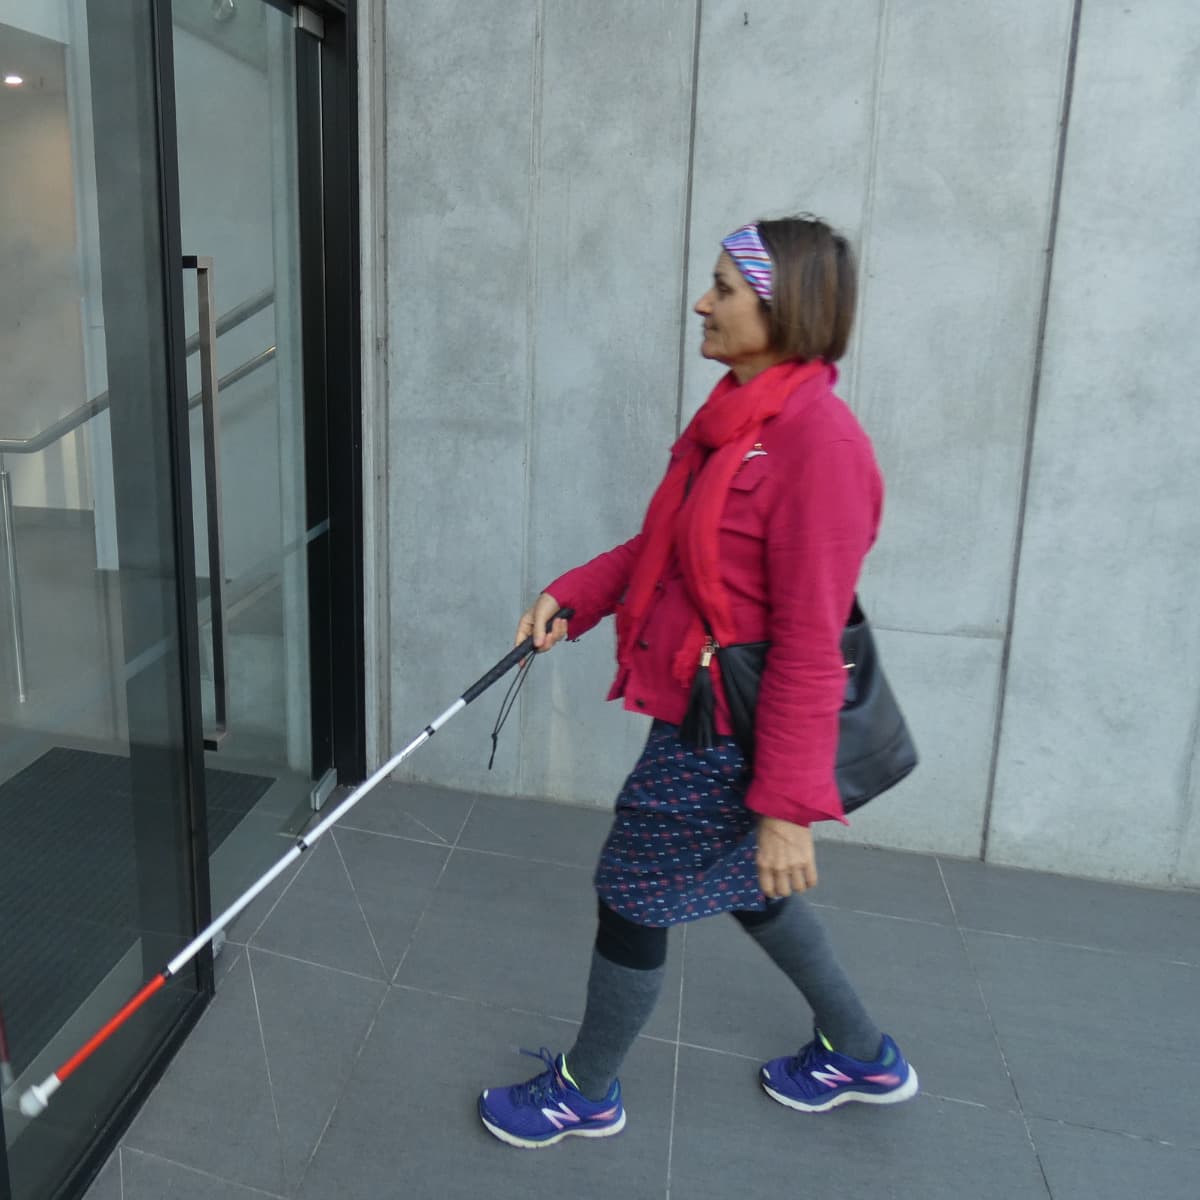 Rhonda, wearing a bright pink jacket and holding her white cane at the entrance to a building, locating the door.